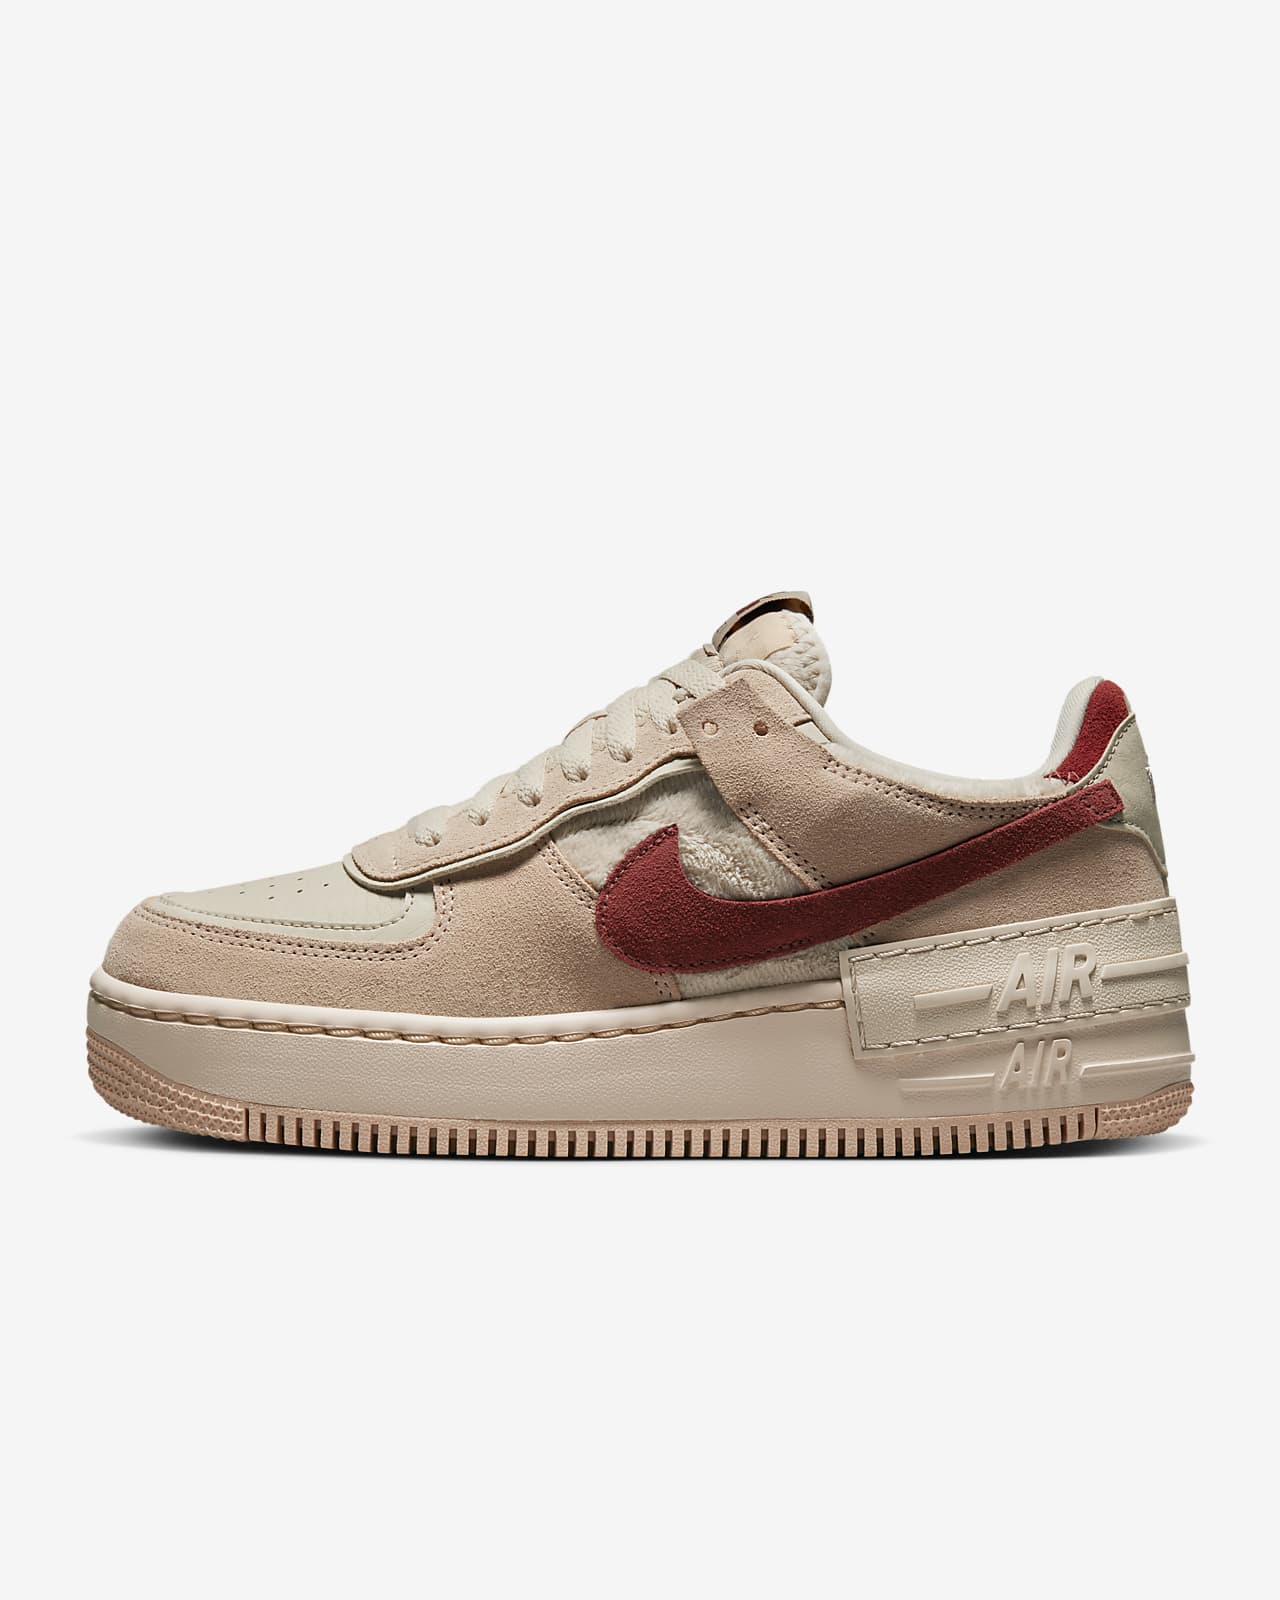 nike women's air force 1 shadow trainer